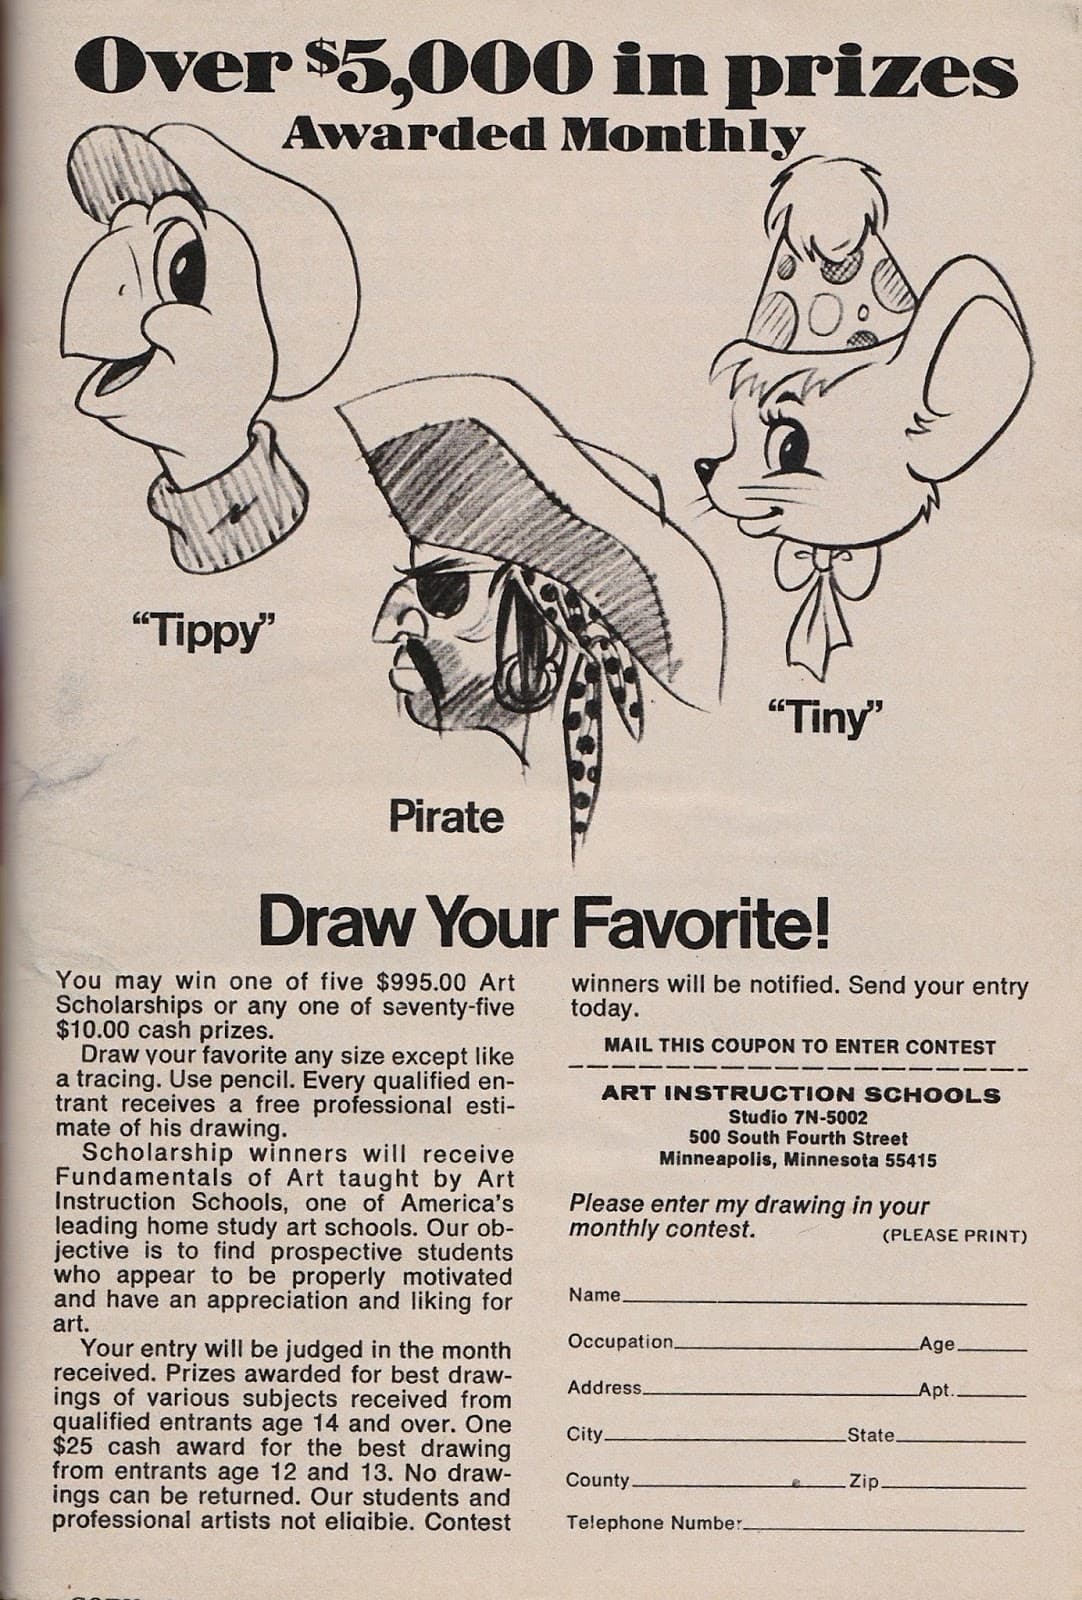 An old “Draw Me” ad for Art Instruction Schools. Credit: Art Instruction Schools